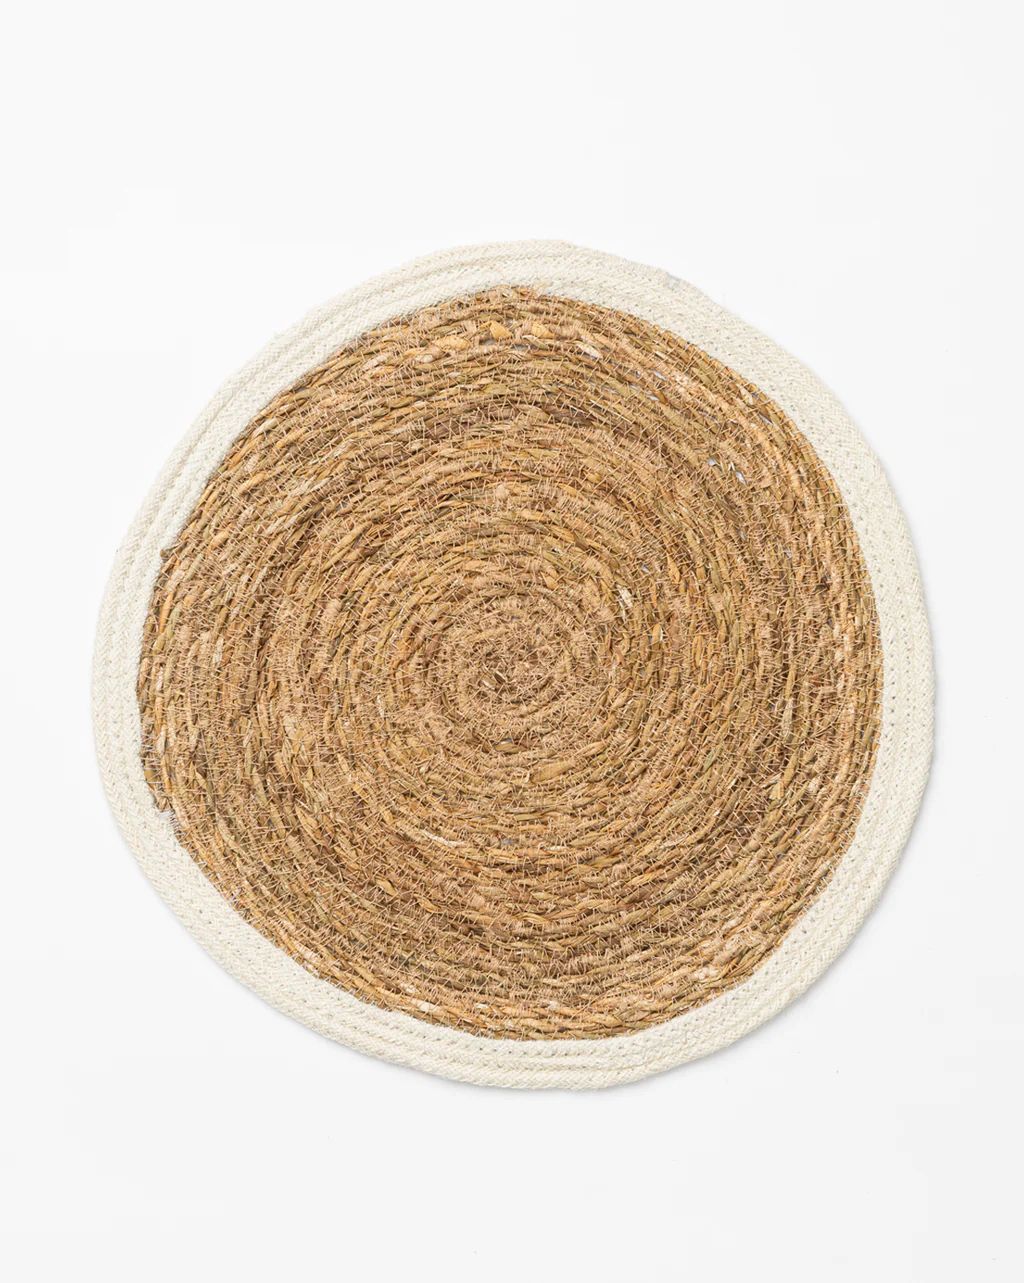 Bordered Jute Placemat | McGee & Co.